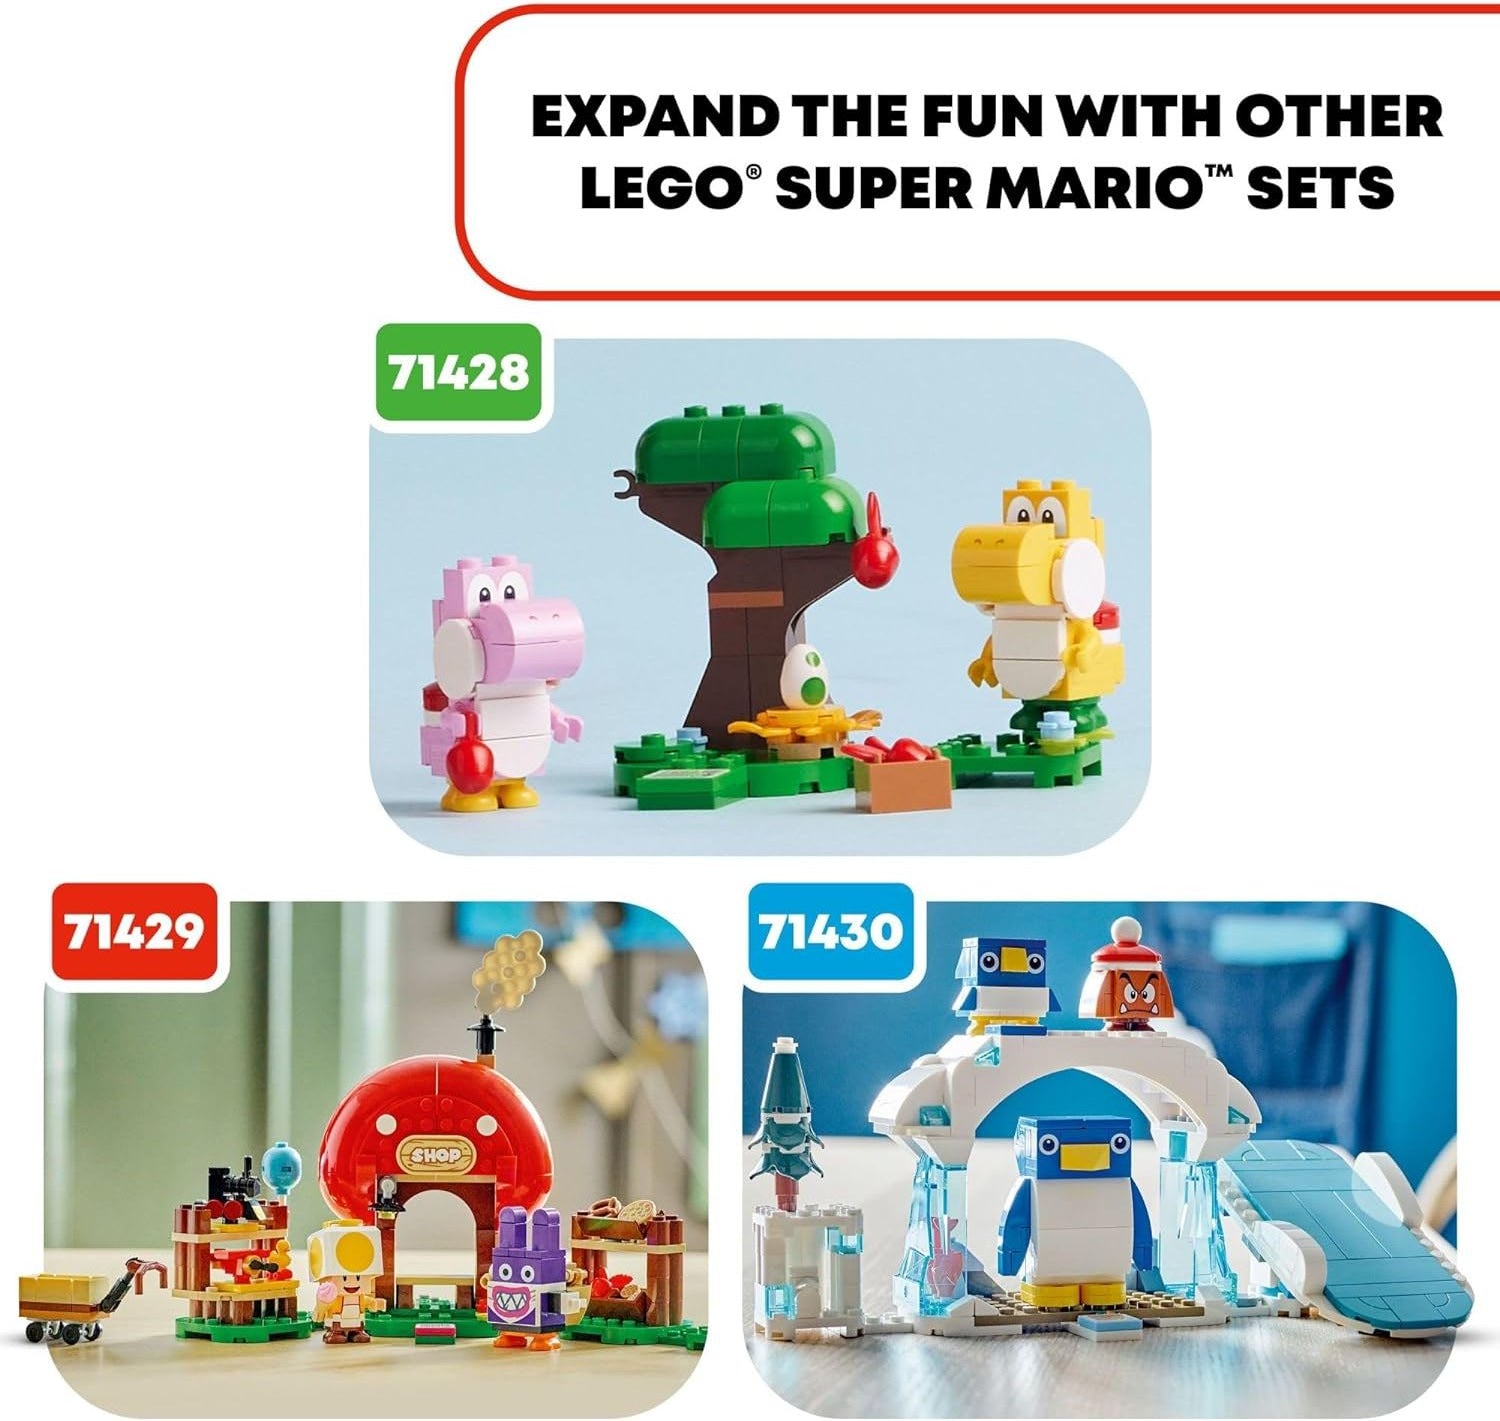 LEGO 71429 Super Mario Nabbit at Toad’s Shop Expansion Set, Build and Display Super Mario Day Toy for Kids, Video Game Toy Gift Idea for Gamers.